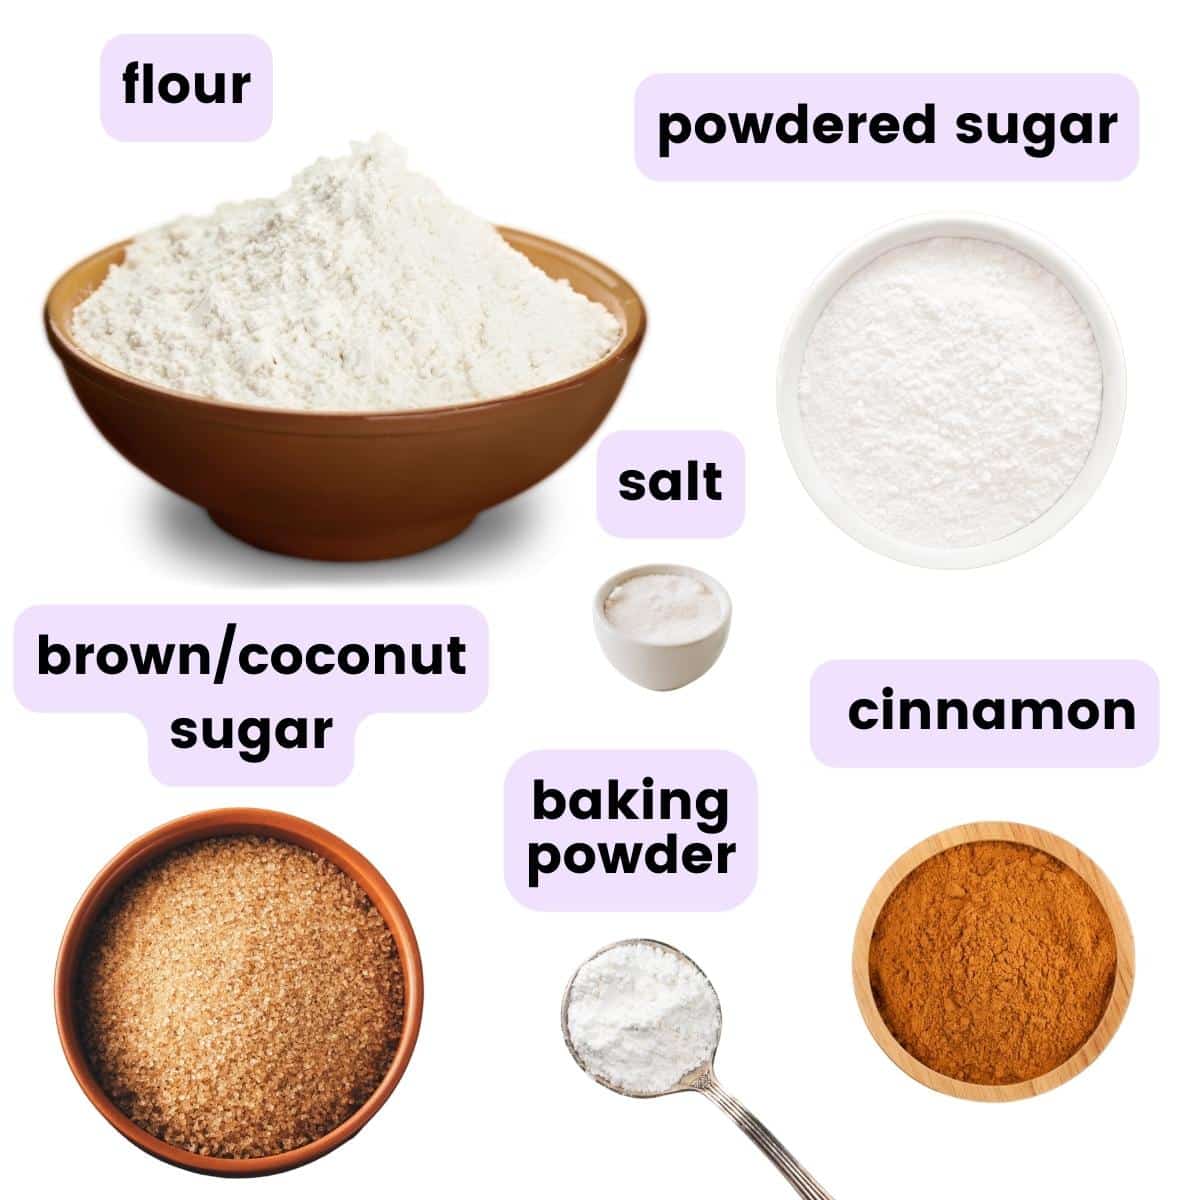 ingredients needed to make a cinnamon roll in a mug (as per the written ingredeint list).